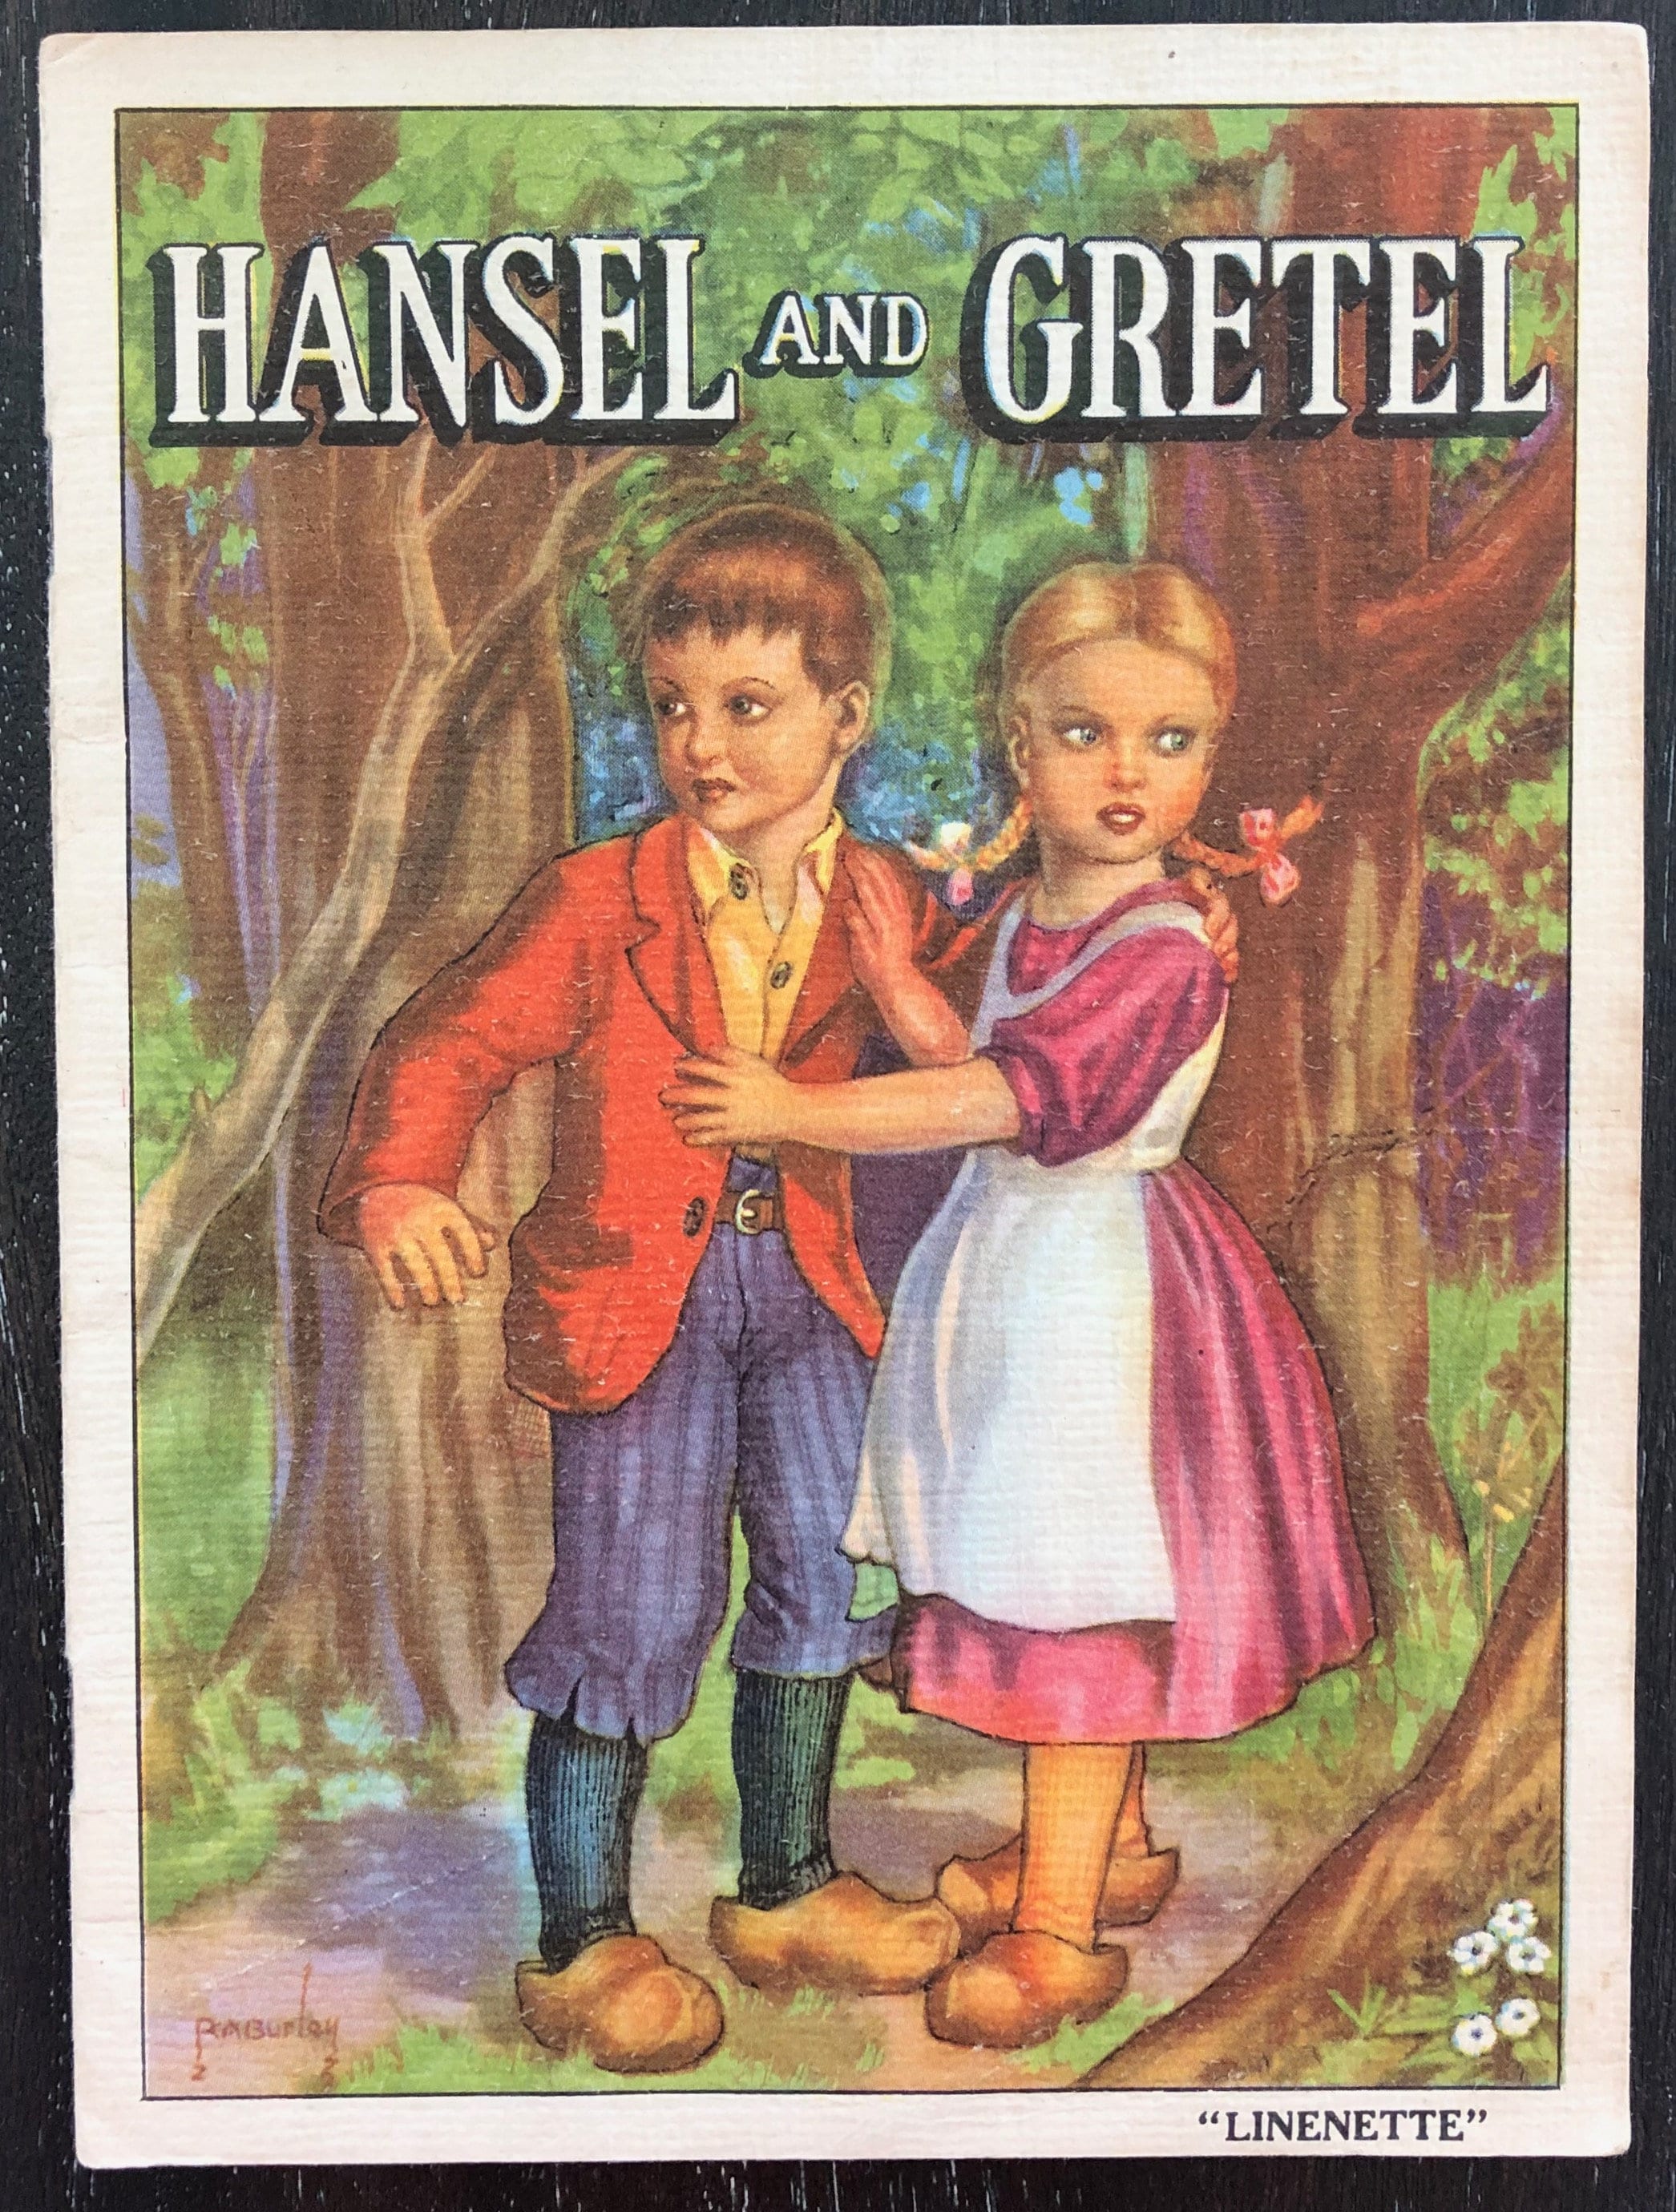 Hansel, Gretel and the witch, from Hansel and Gretel published by Blackie  and Son Limited, c.1940